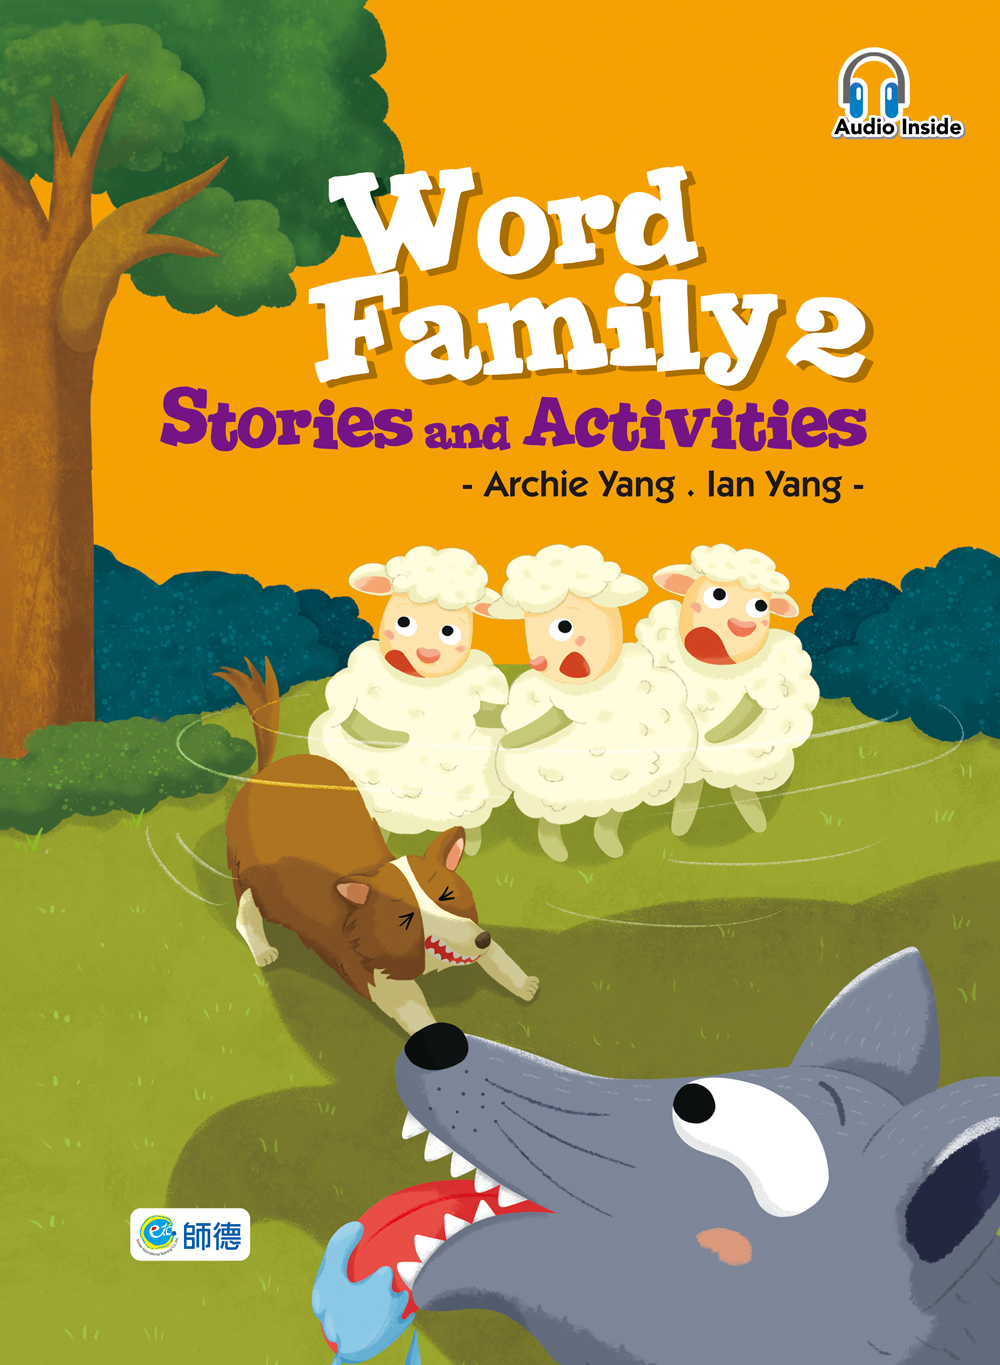 Word Family 2 Stories and Activities (附QR CODE隨掃即聽音檔)